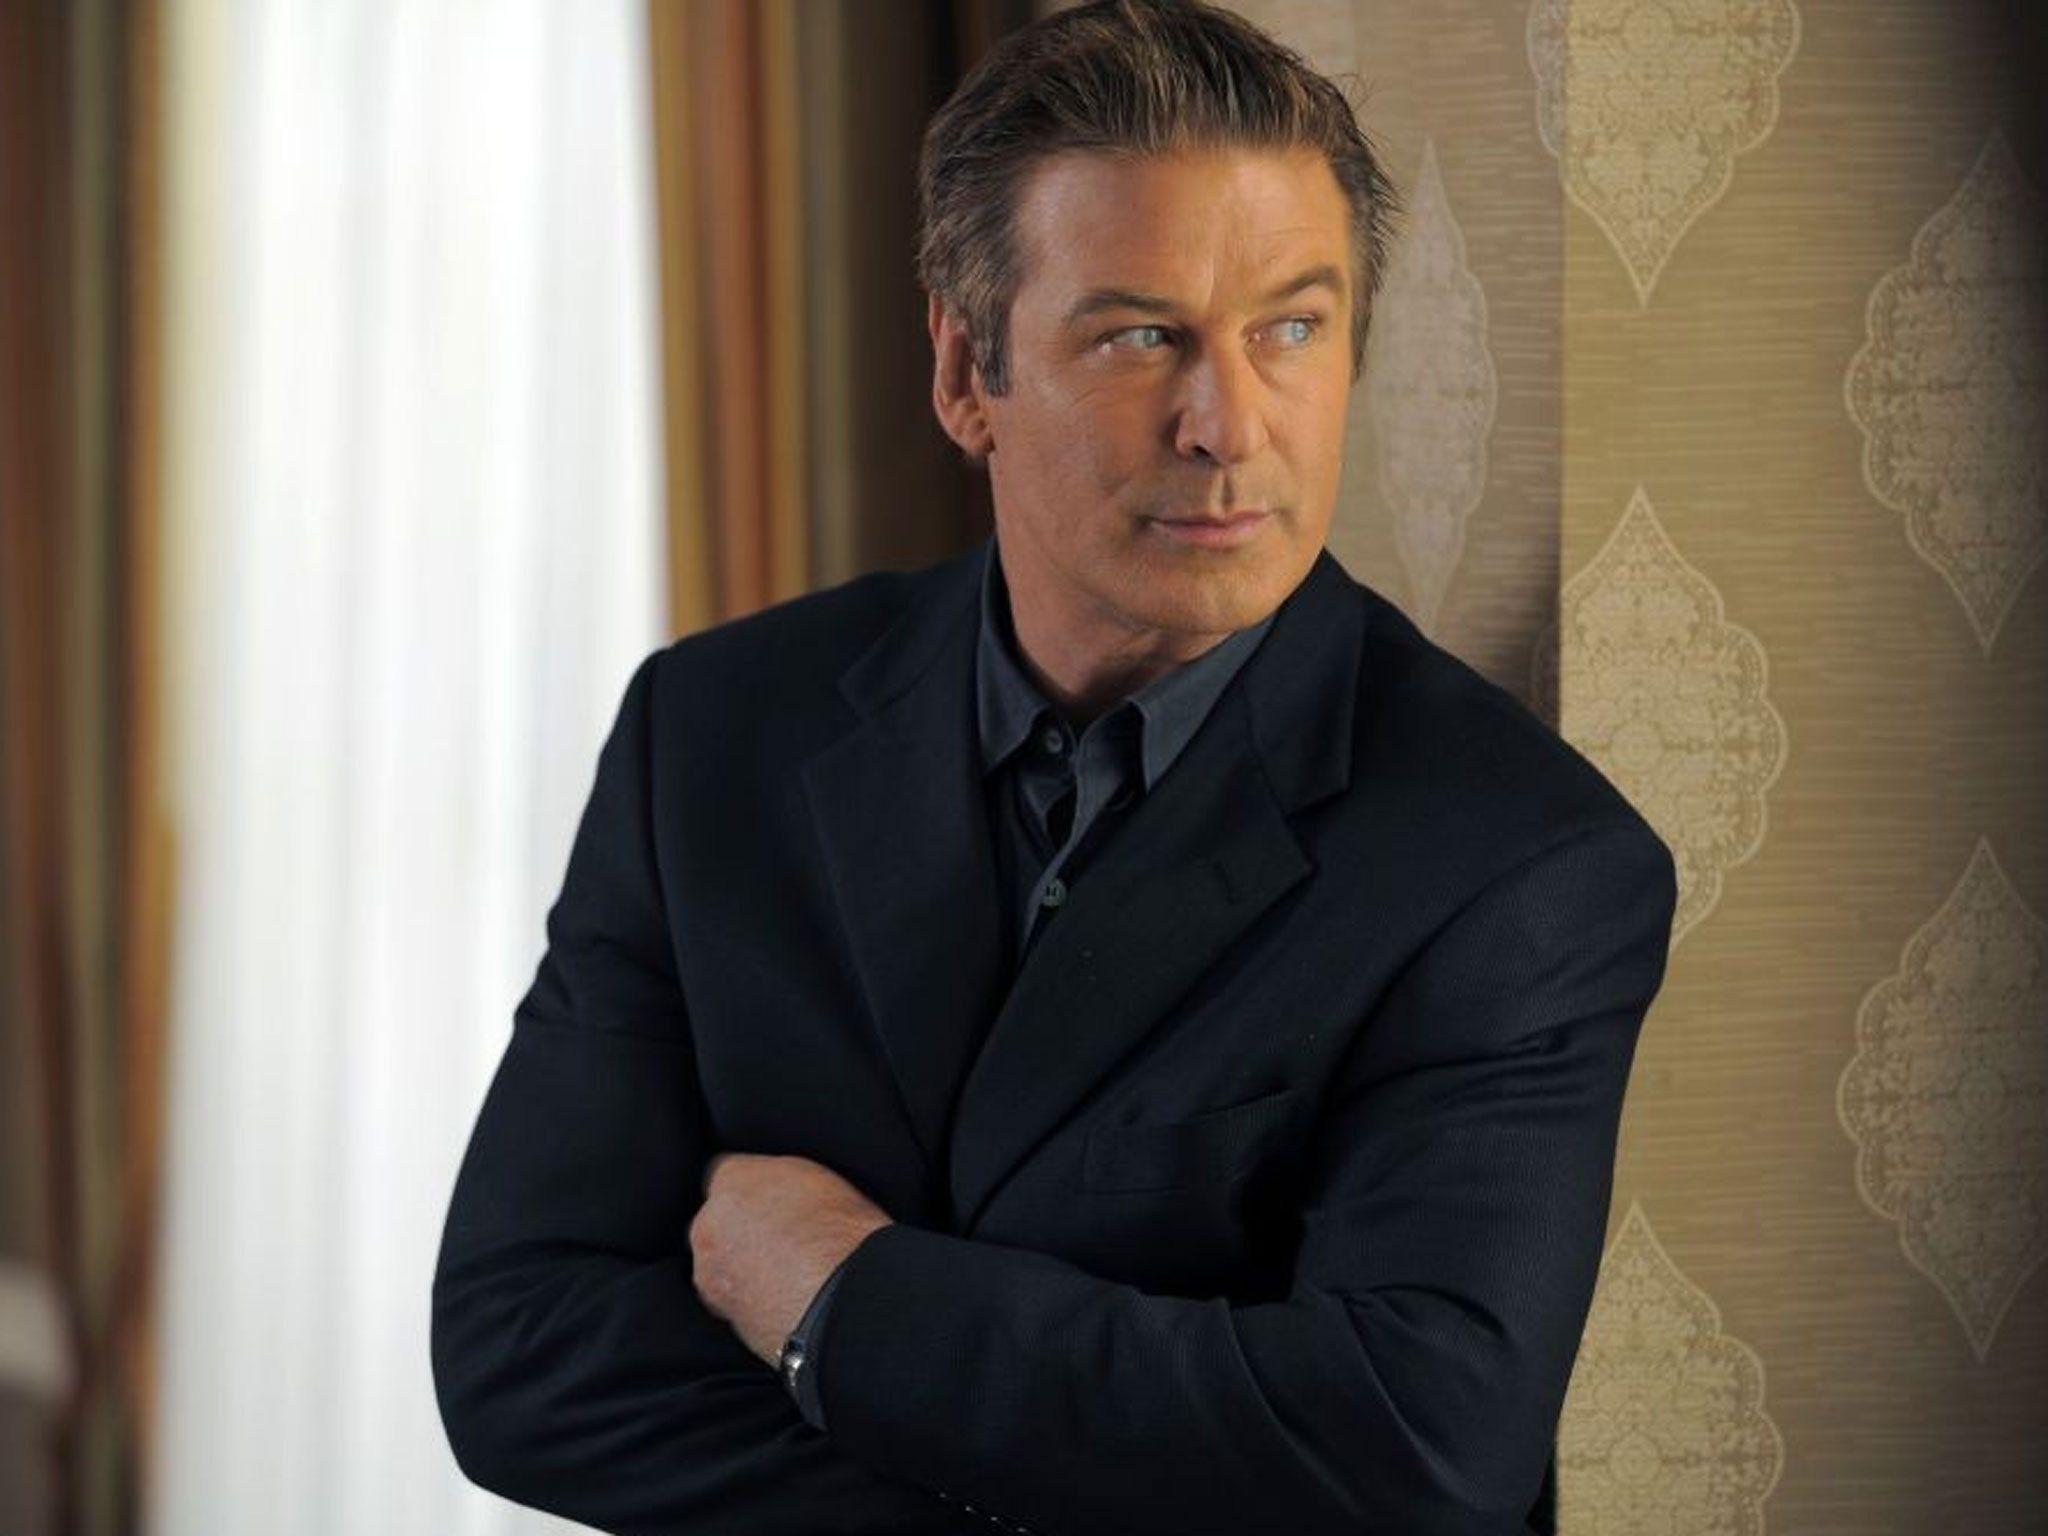 Alec Baldwin Actor HD Wallpapers 62 2048x1536 px PickyWallpapers.